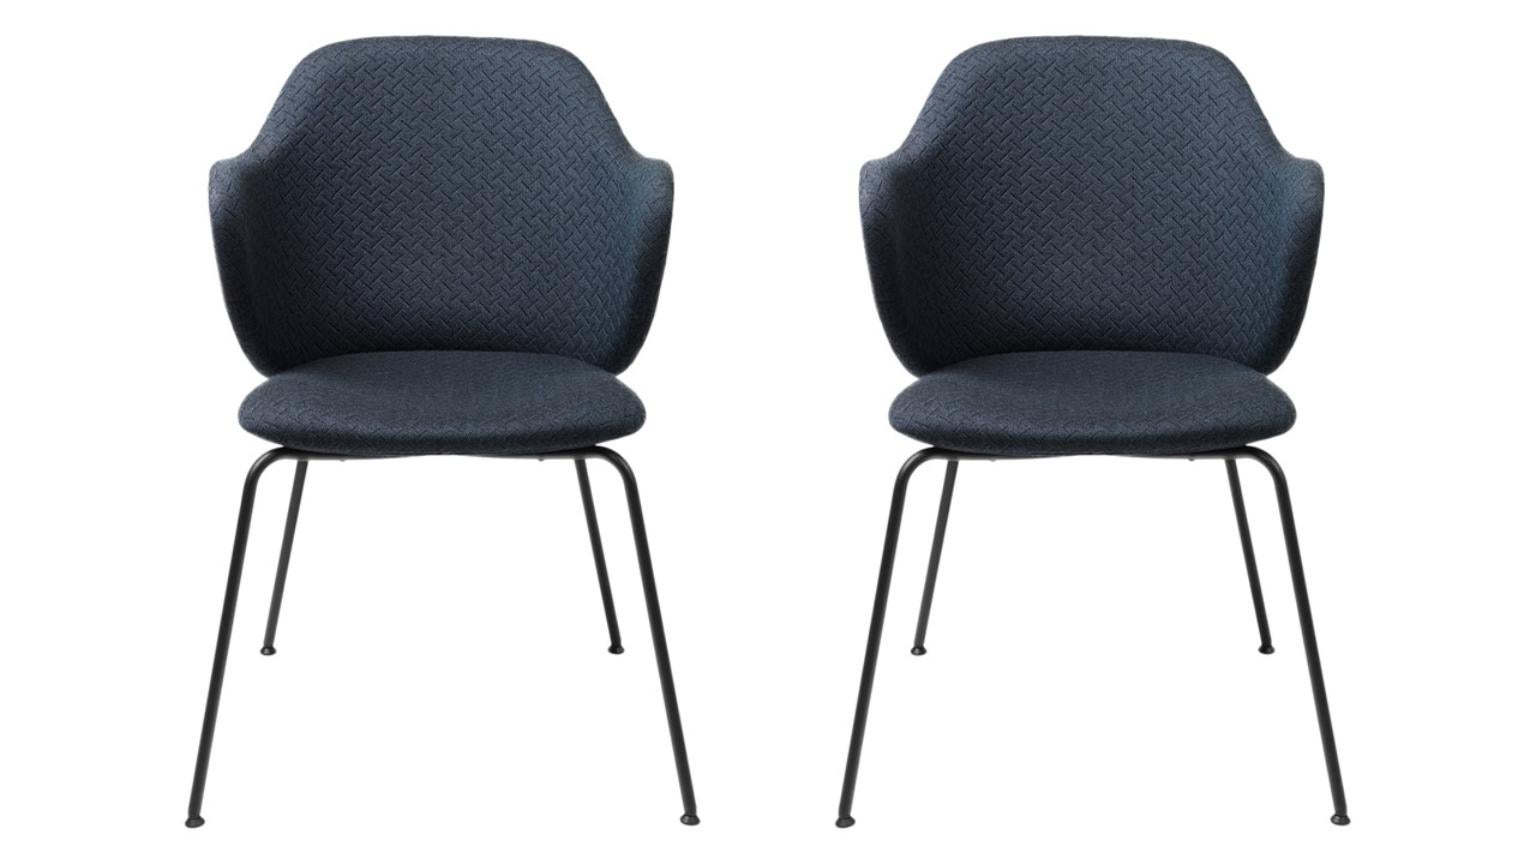 Set of 2 blue Jupiter Lassen chairs by Lassen
Dimensions: W 58 x D 60 x H 88 cm 
Materials: Textile

The Lassen chair by Flemming Lassen, Magnus Sangild and Marianne Viktor was launched in 2018 as an ode to Flemming Lassen’s uncompromising